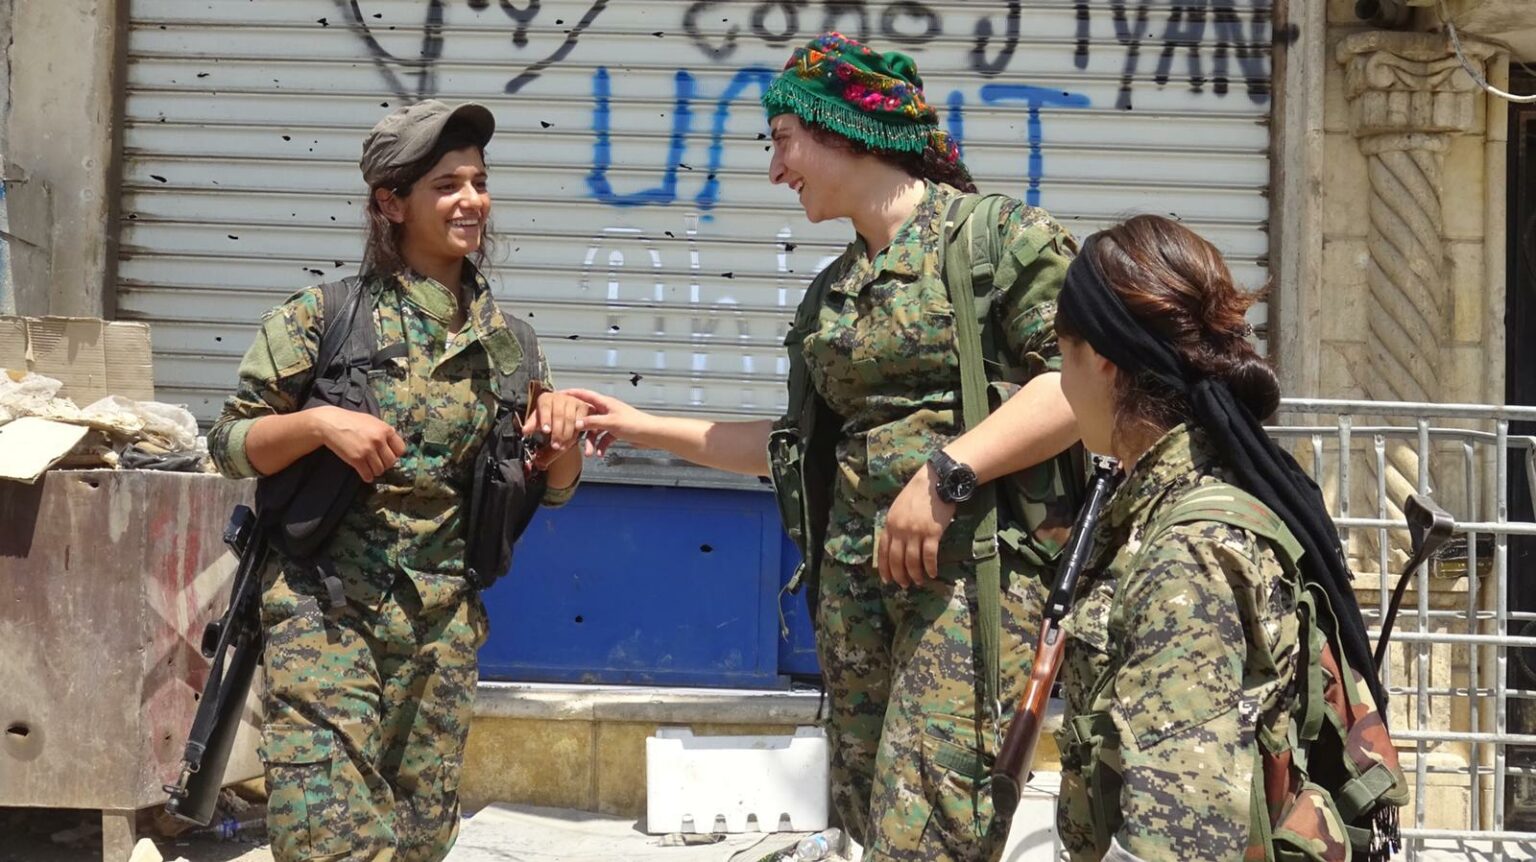 A group of fighters, part of an all-female Kurdish militia, share a laugh. Photo courtesy of: The Daughters of Kobani